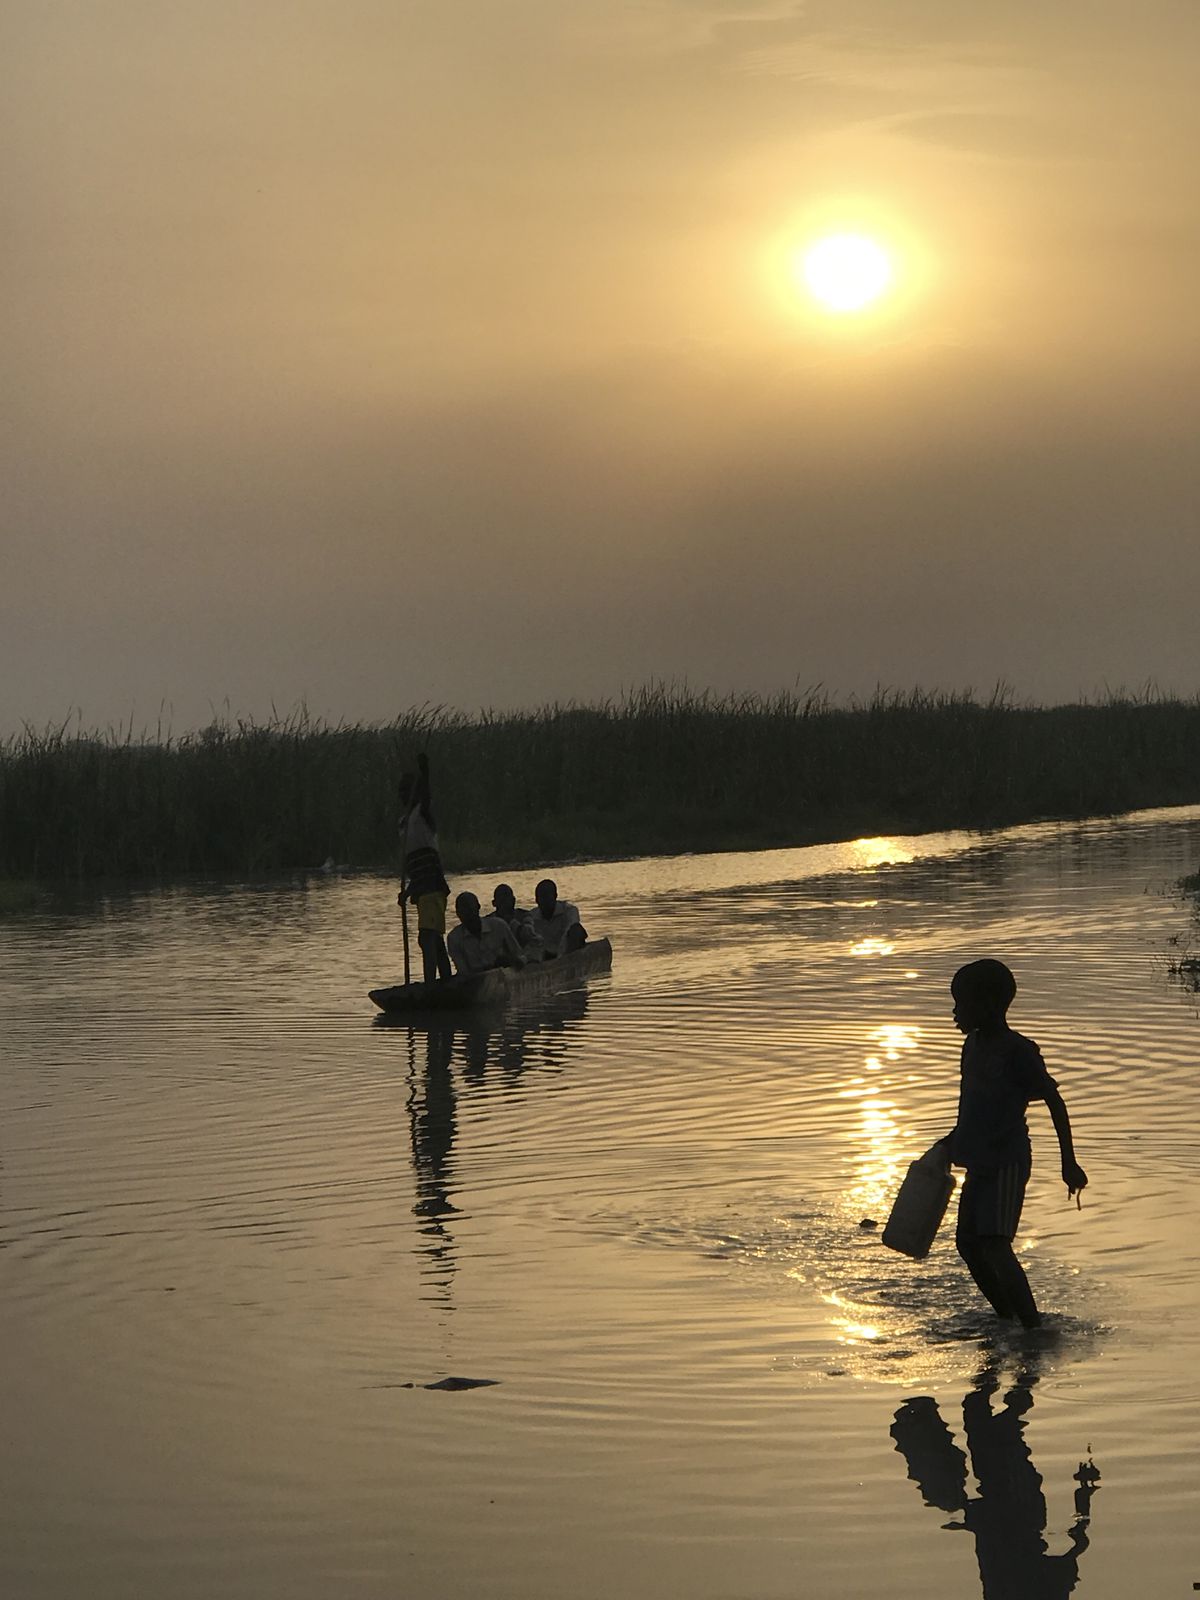 Ganyiel, South Sudan is a village inside the swamps where aid agencies have been trying to help those who managed to make to here, fleeing from government soldiers. Many die trying to get to these rebel-held villages.